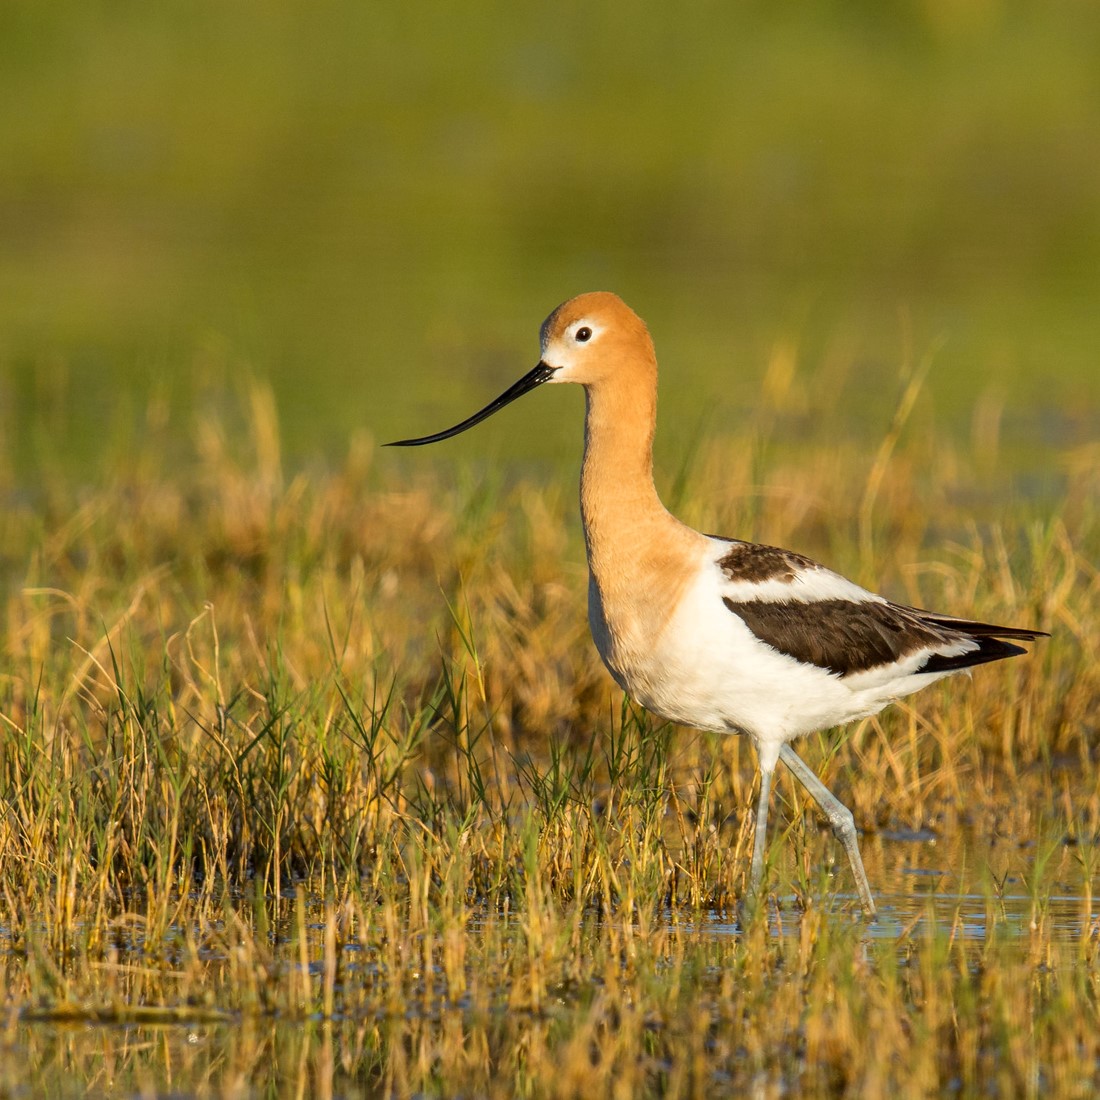 An American Avocet wades through some marshy water.